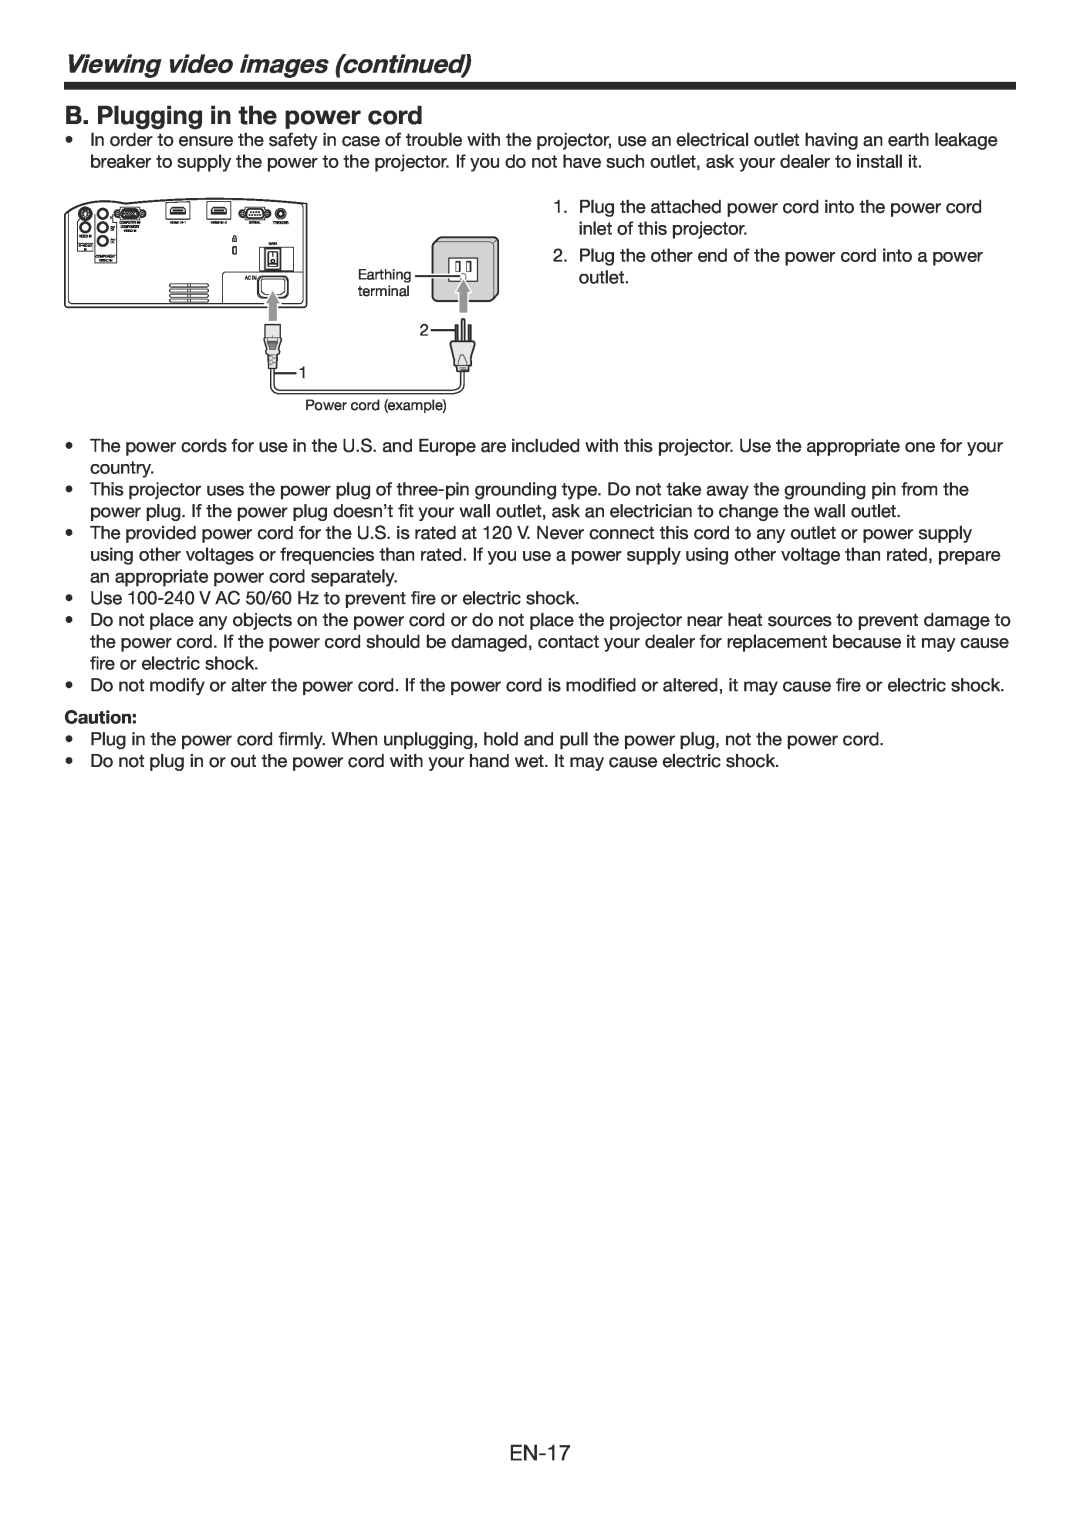 Mitsubishi Electronics HC6800 user manual B. Plugging in the power cord, Viewing video images continued, EN-17 